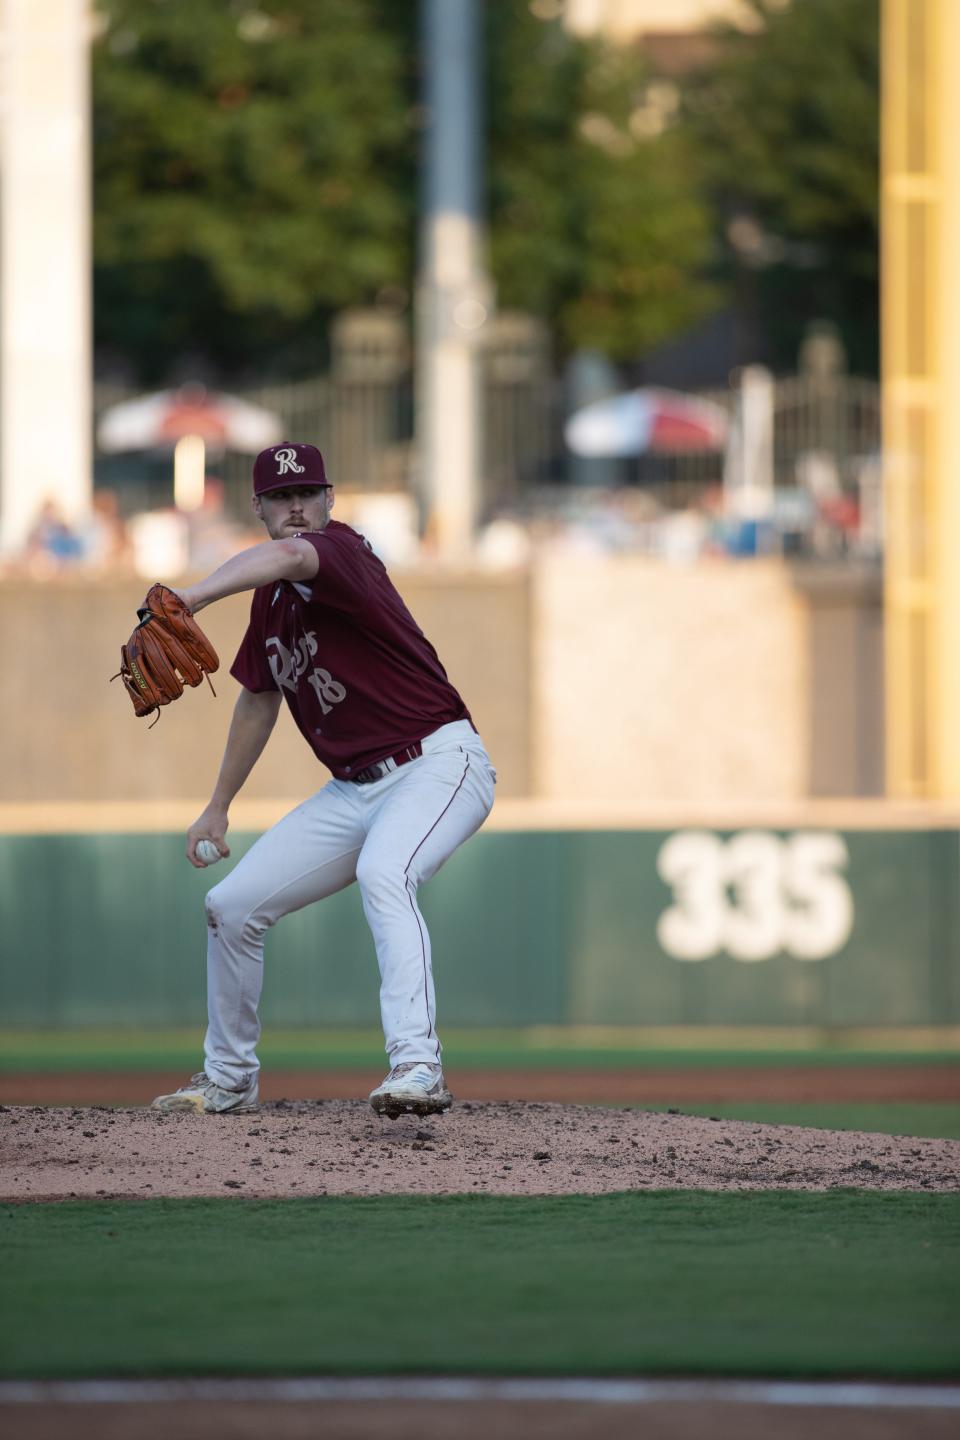 Detroit Tigers right-hander Mason Englert, selected in the 2022 Rule 5 draft, pitching for Double-A Frisco in the Texas Rangers' organization.